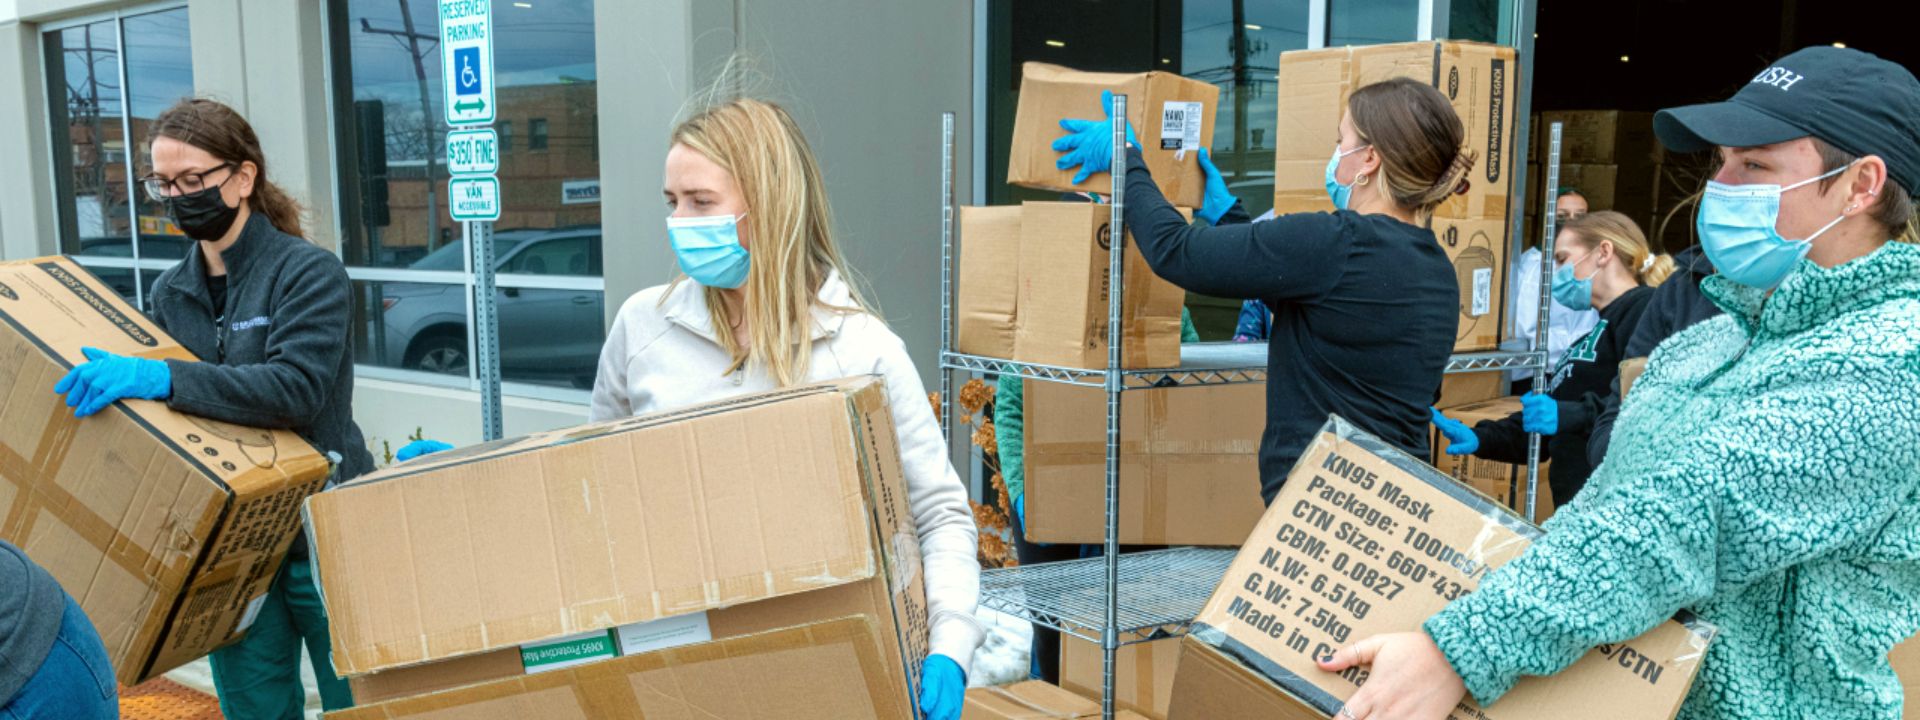 Students load boxes of KN95 masks into cars for donation